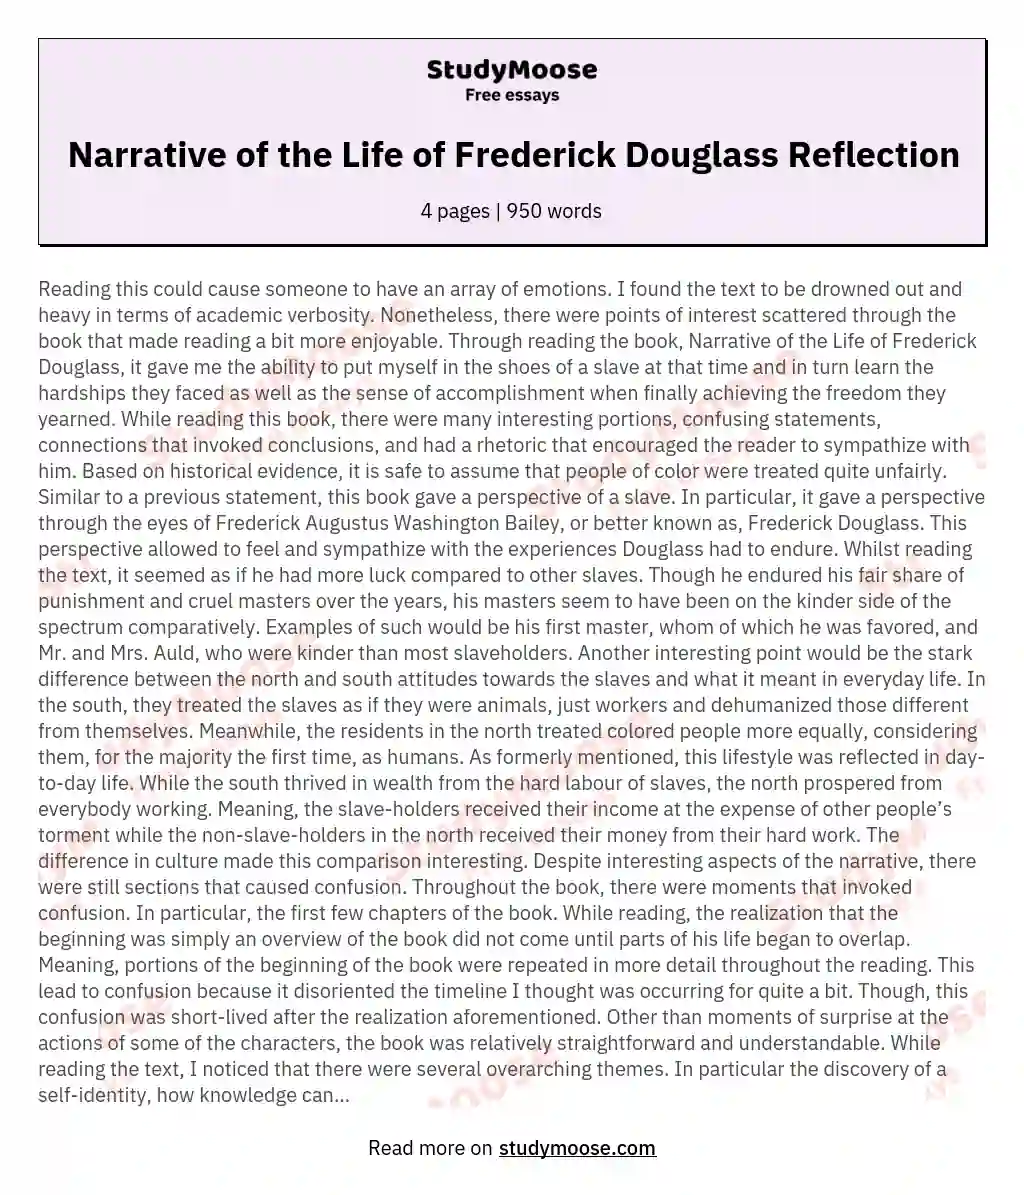 Narrative of the Life of Frederick Douglass Reflection